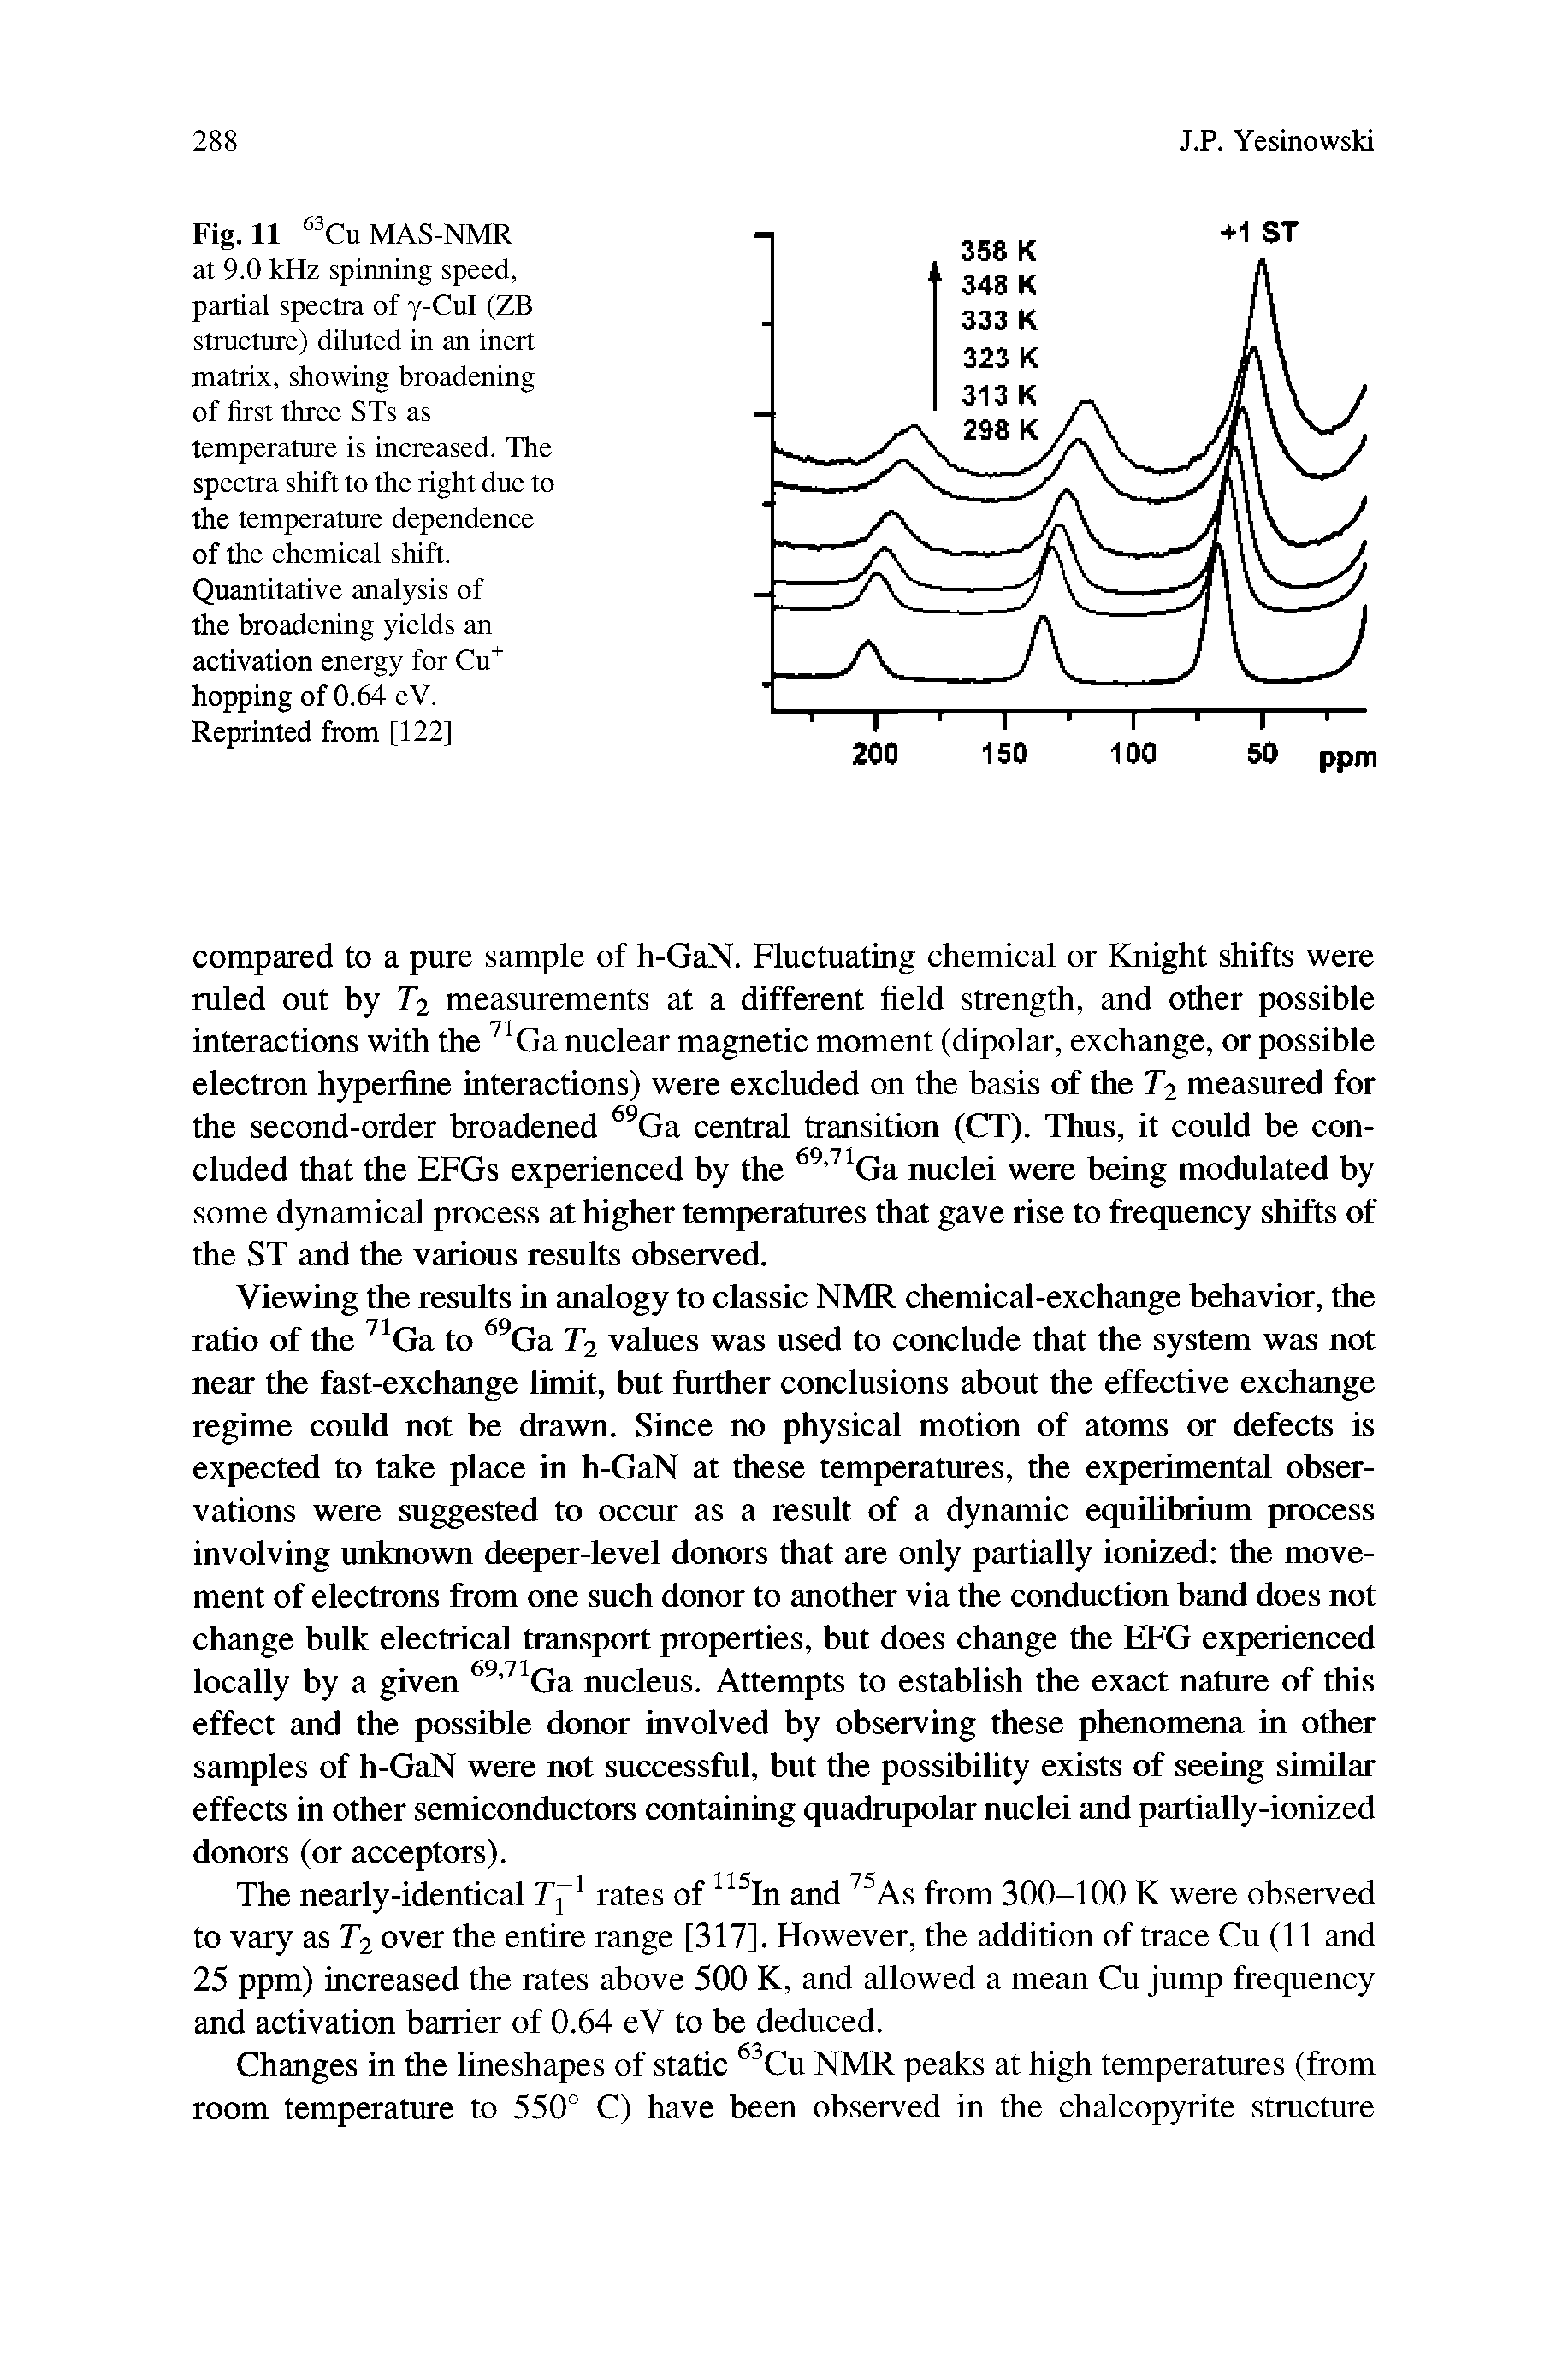 Fig. 11 63CuMAS-NMR at 9.0 kHz spinning speed, partial spectra of y-Cul (ZB structure) diluted in an inert matrix, showing broadening of first three STs as temperature is increased. The spectra shift to the right due to the temperature dependence of the chemical shift. Quantitative analysis of the broadening yields an activation energy for Cu+ hopping of 0.64 eV. Reprinted from [122]...